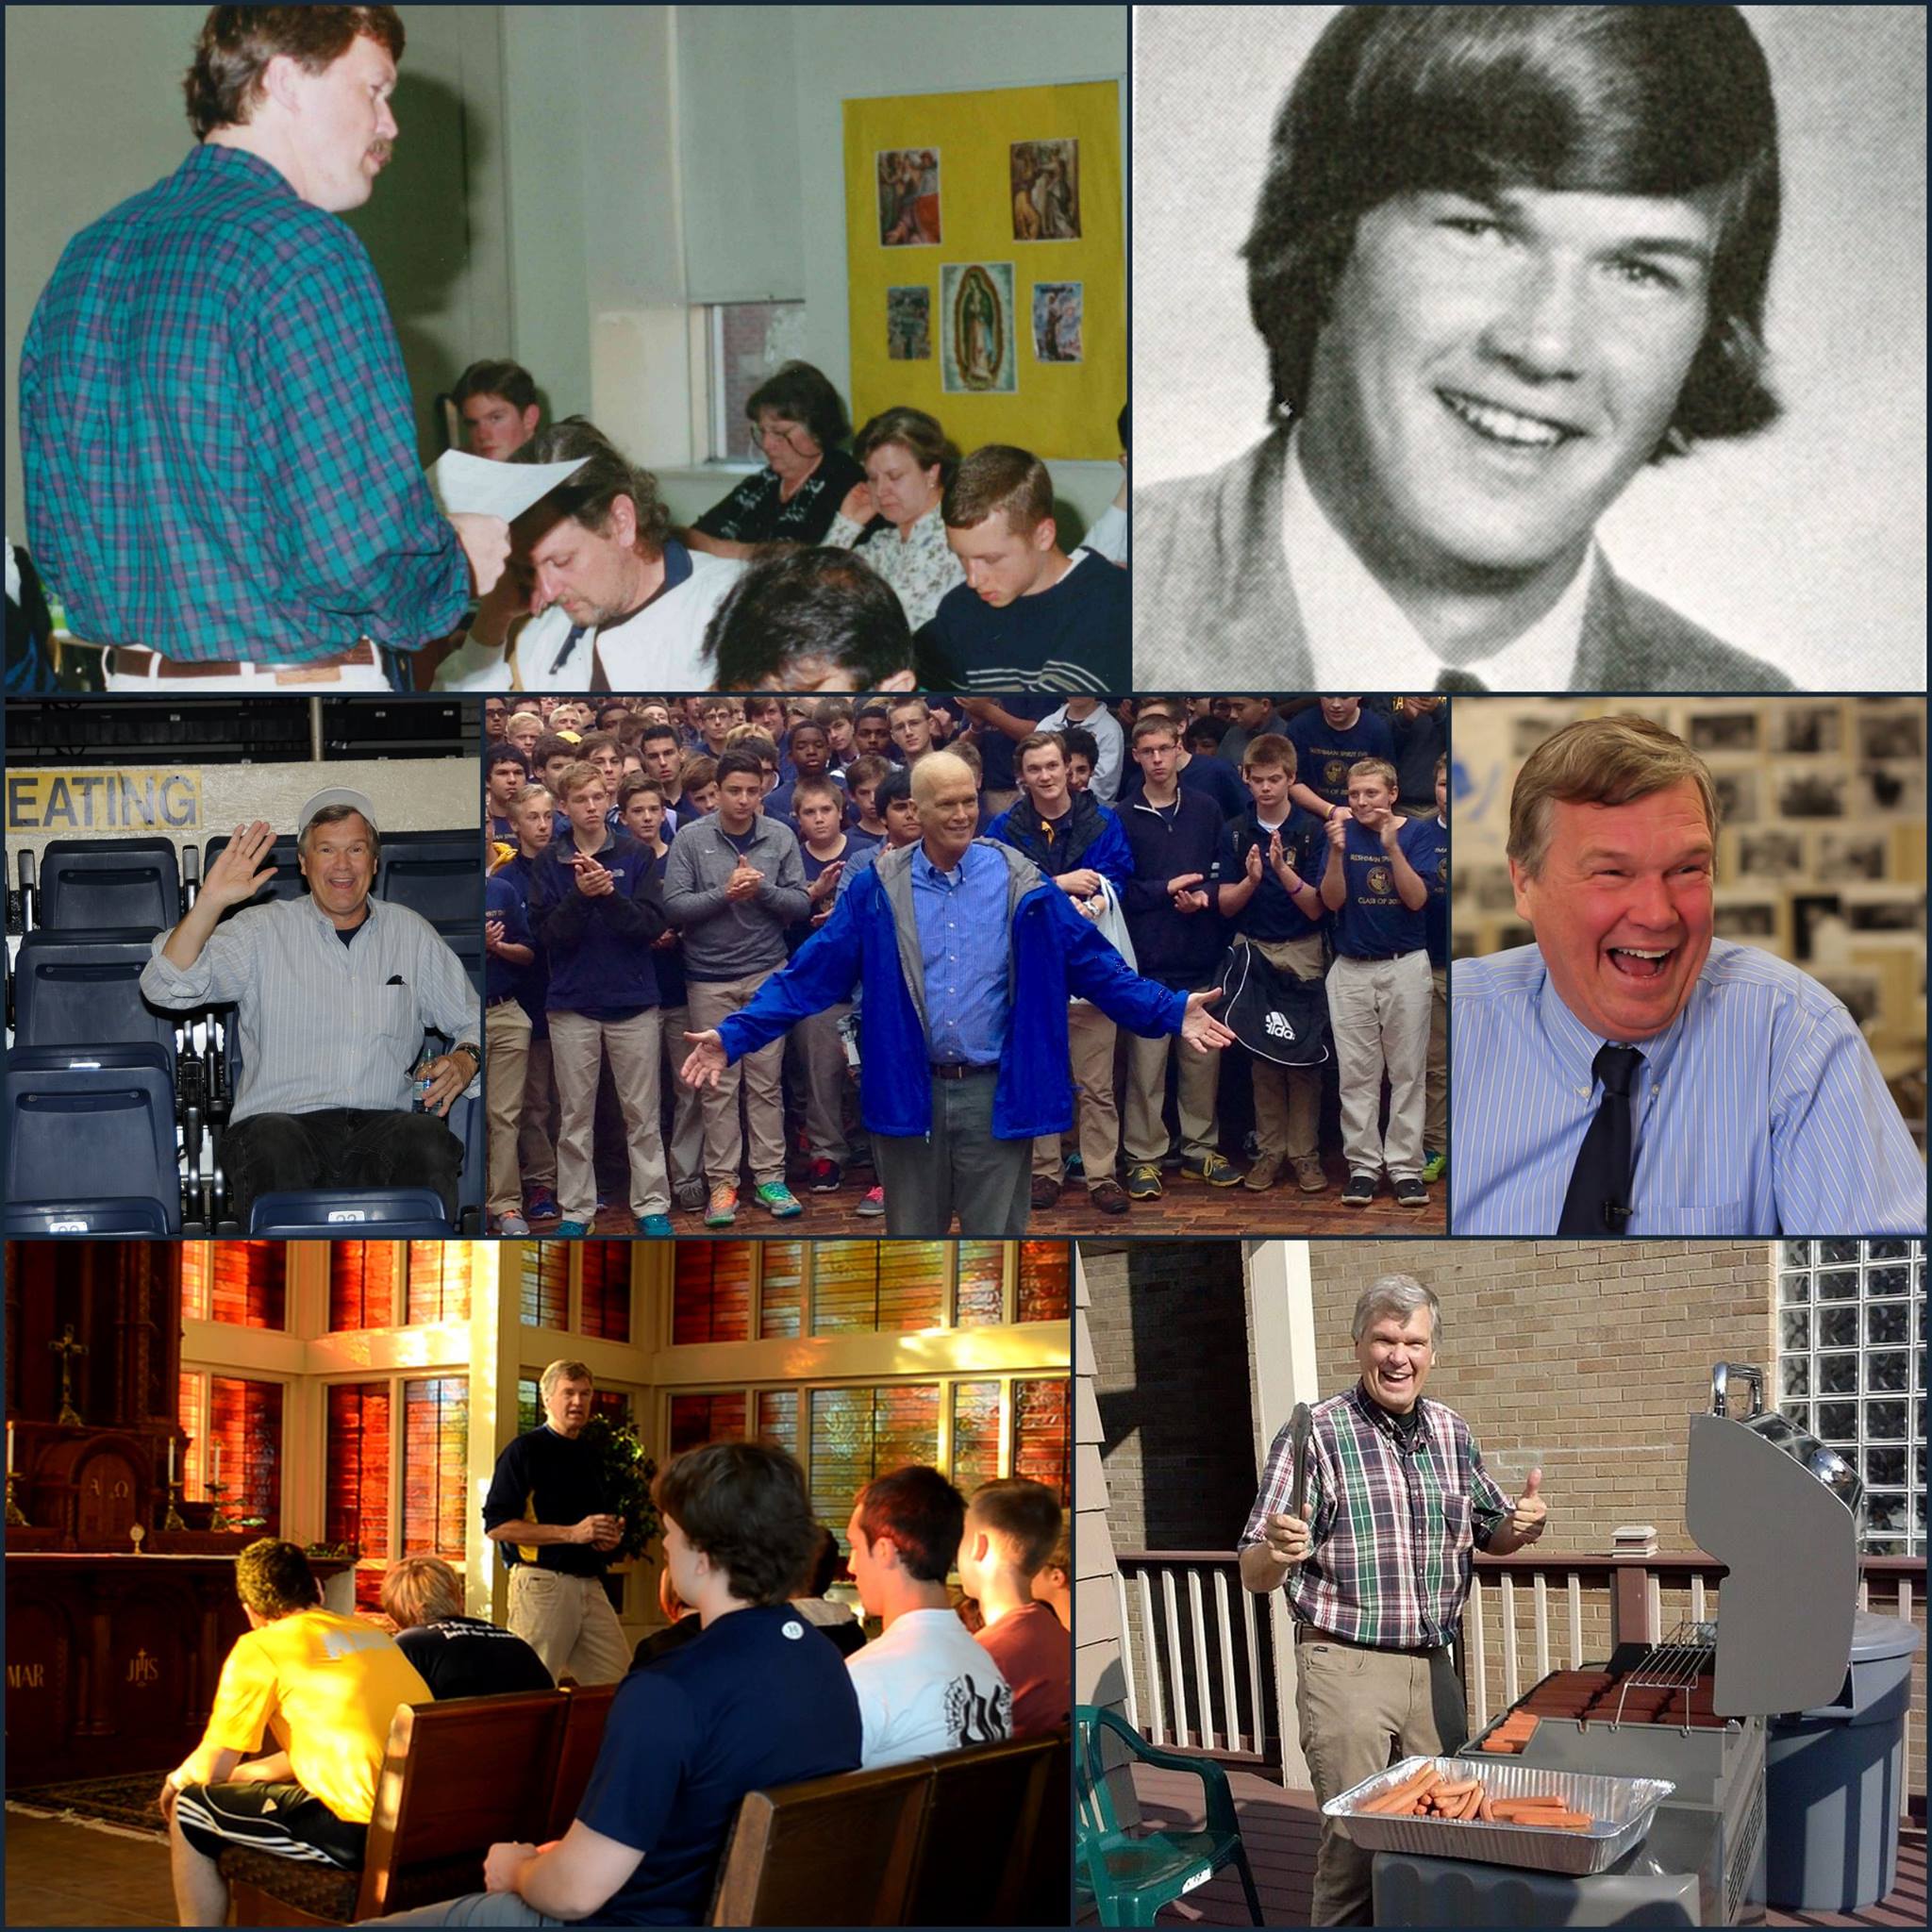 Click to leave a remembrance of Jim Skerl on St. Ignatius' Facebook page.